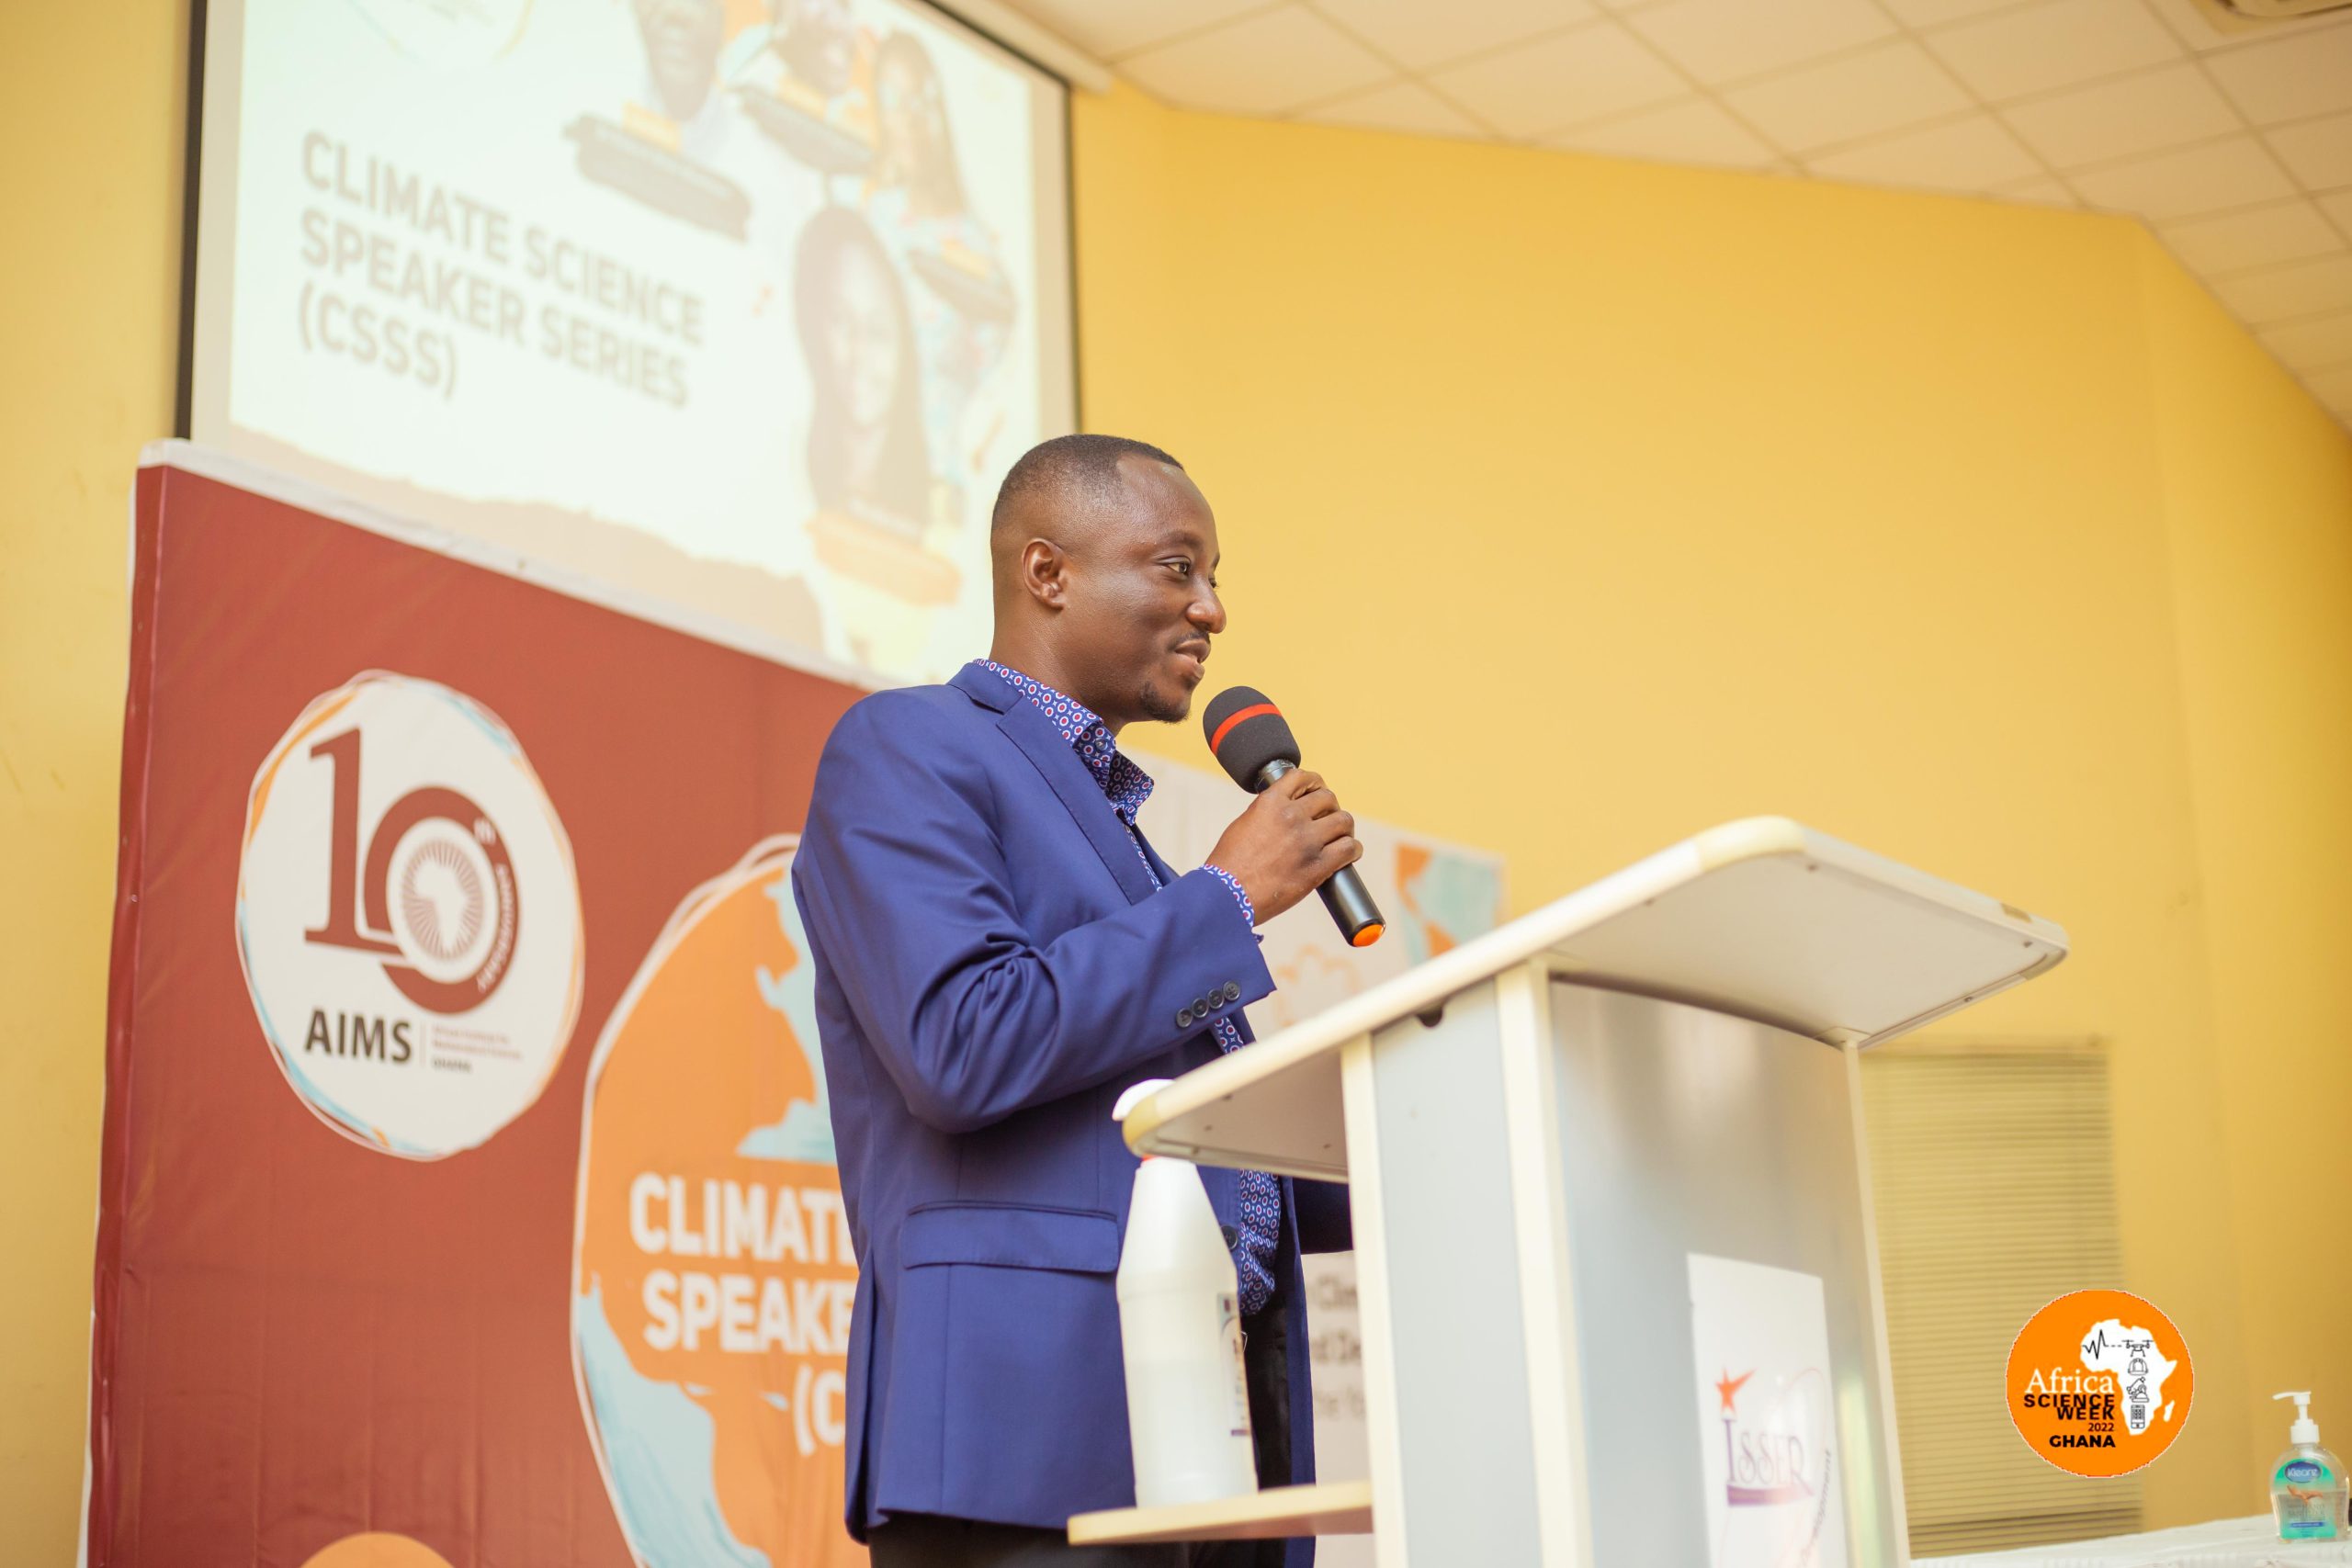 Youth urged to play crucial role in climate change advocacy at AIMS Ghana’s CSSS 2022